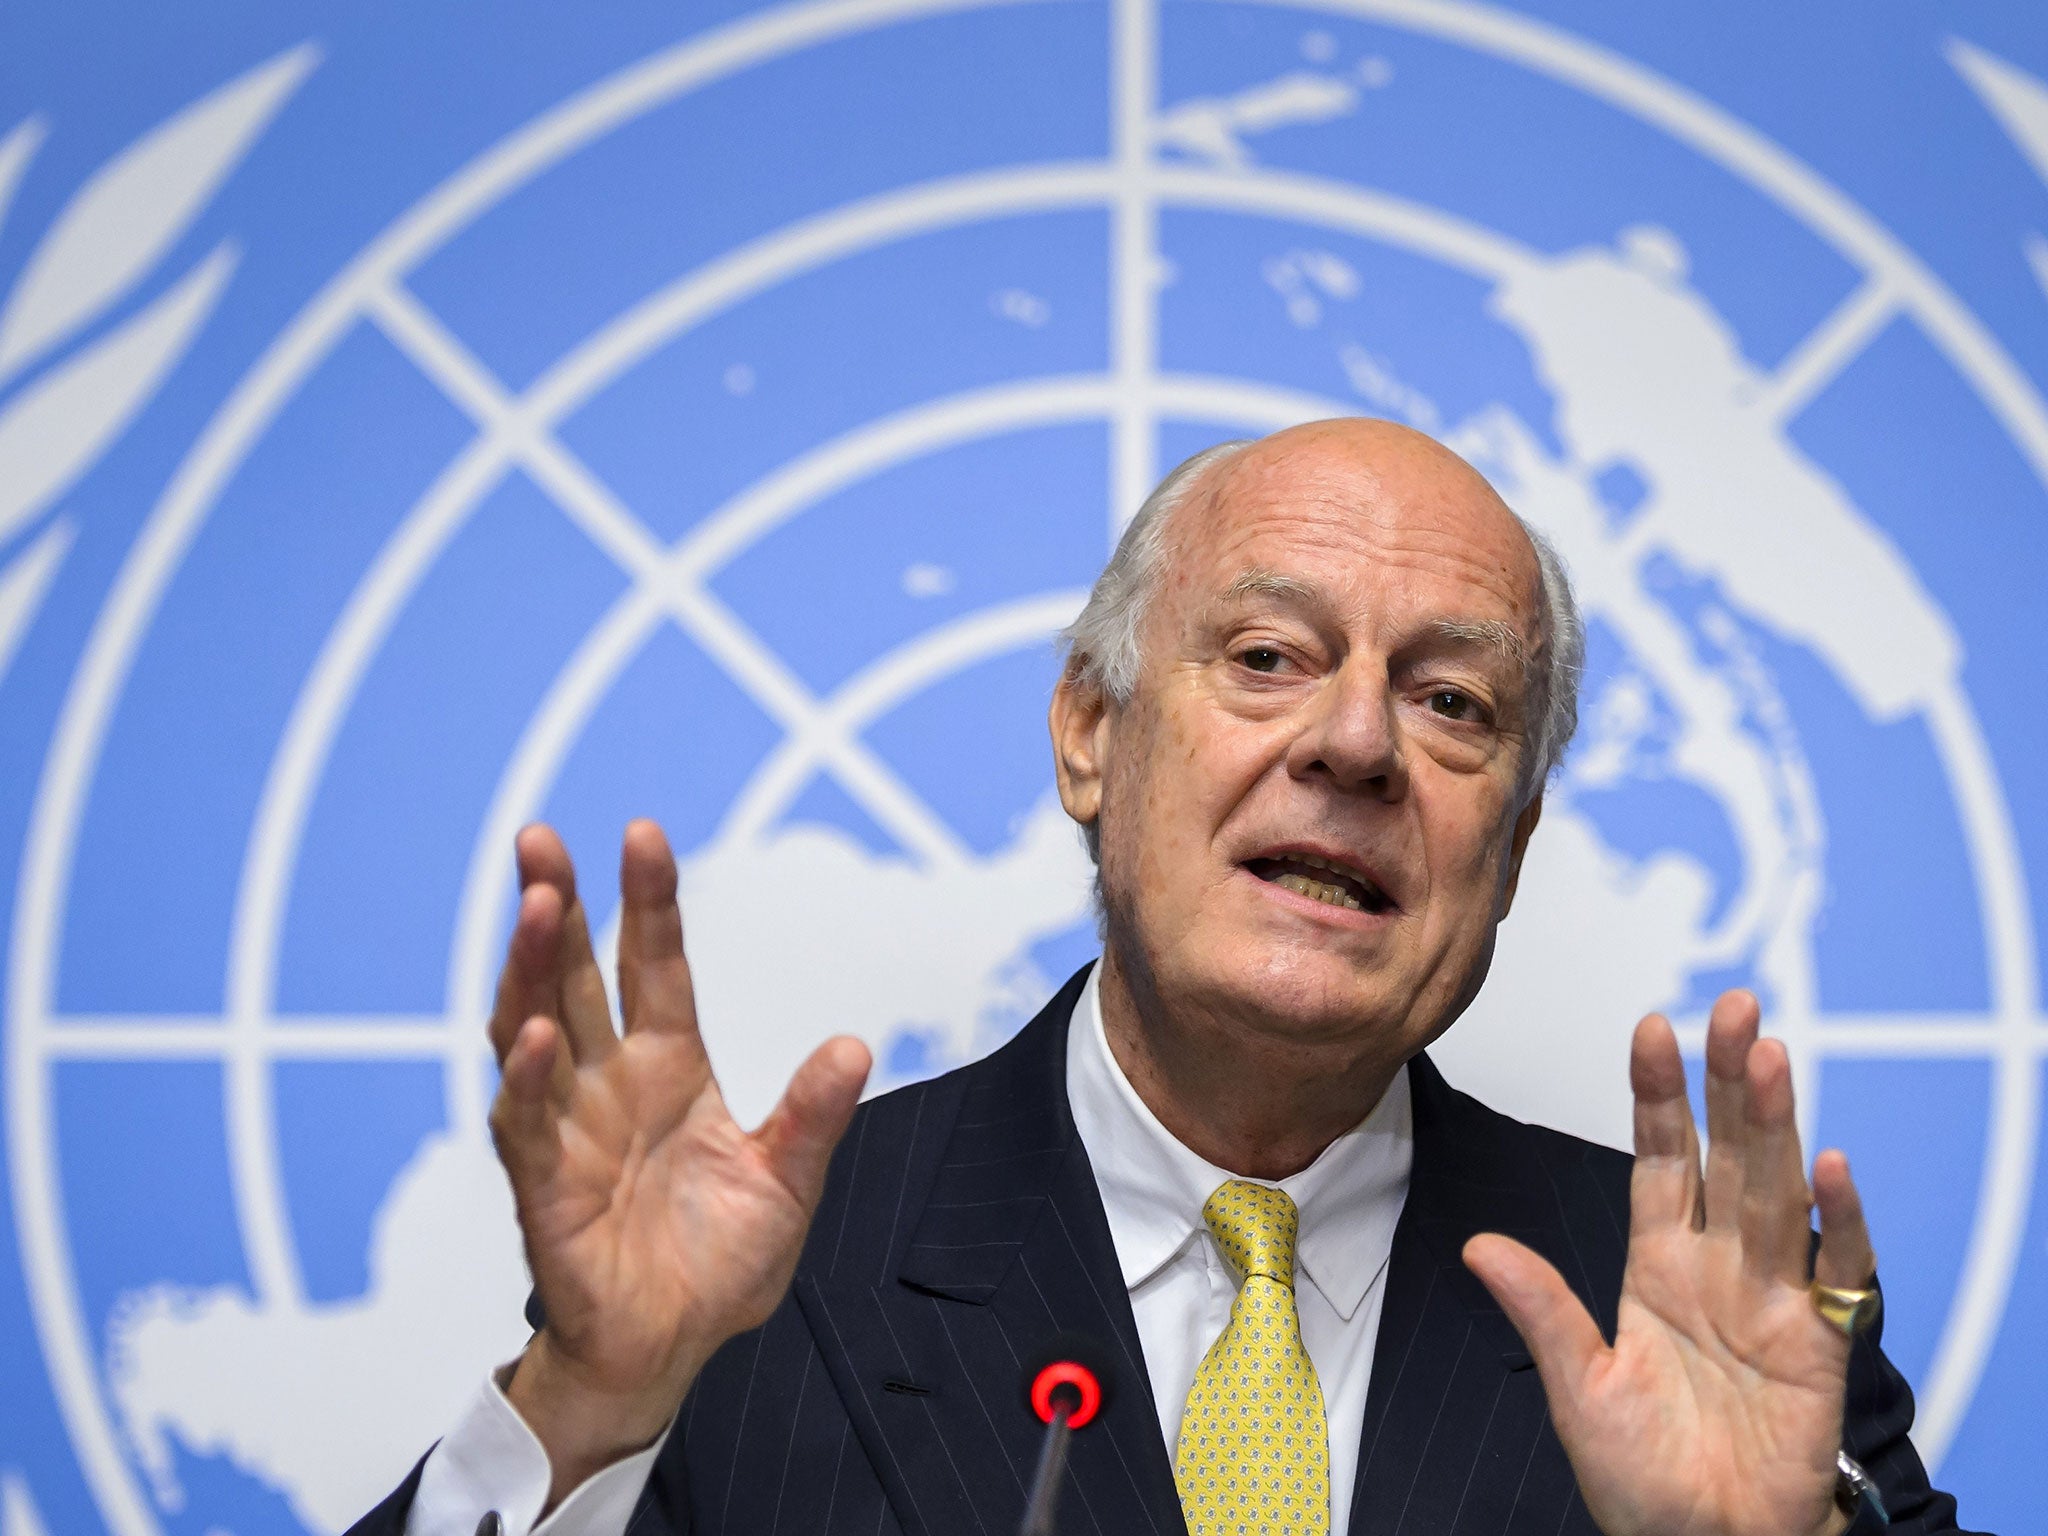 Staffan de Mistura is trying to relaunch the peace process